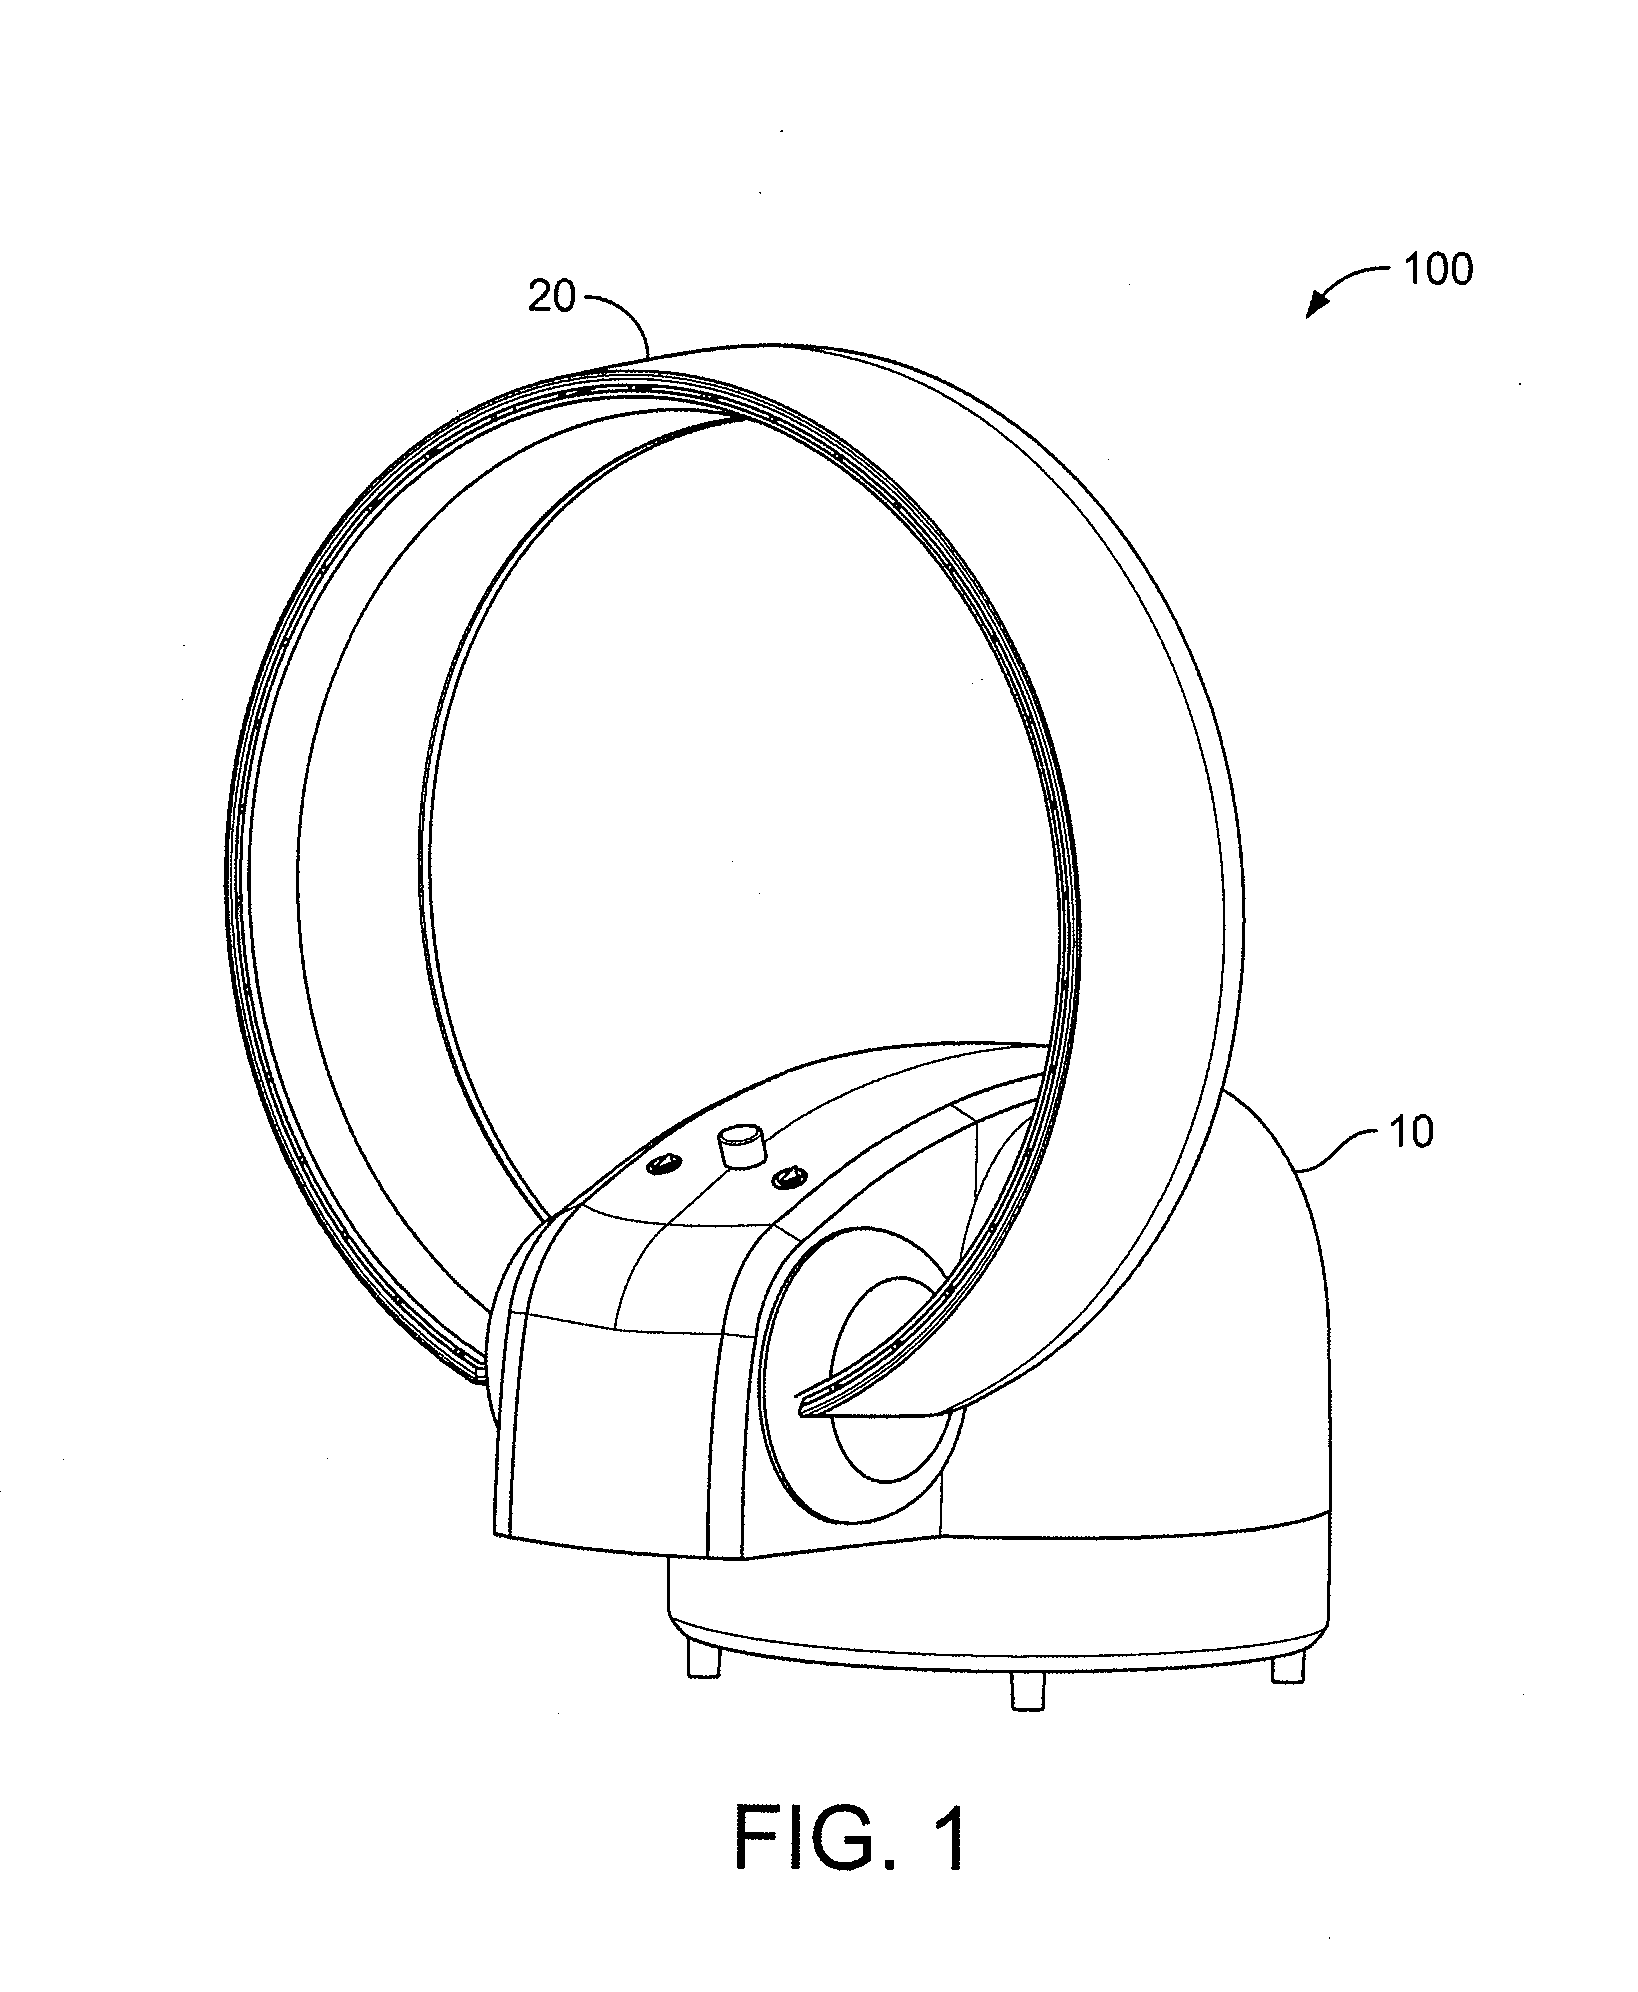 Device for blowing air by means of narrow slit nozzle assembly